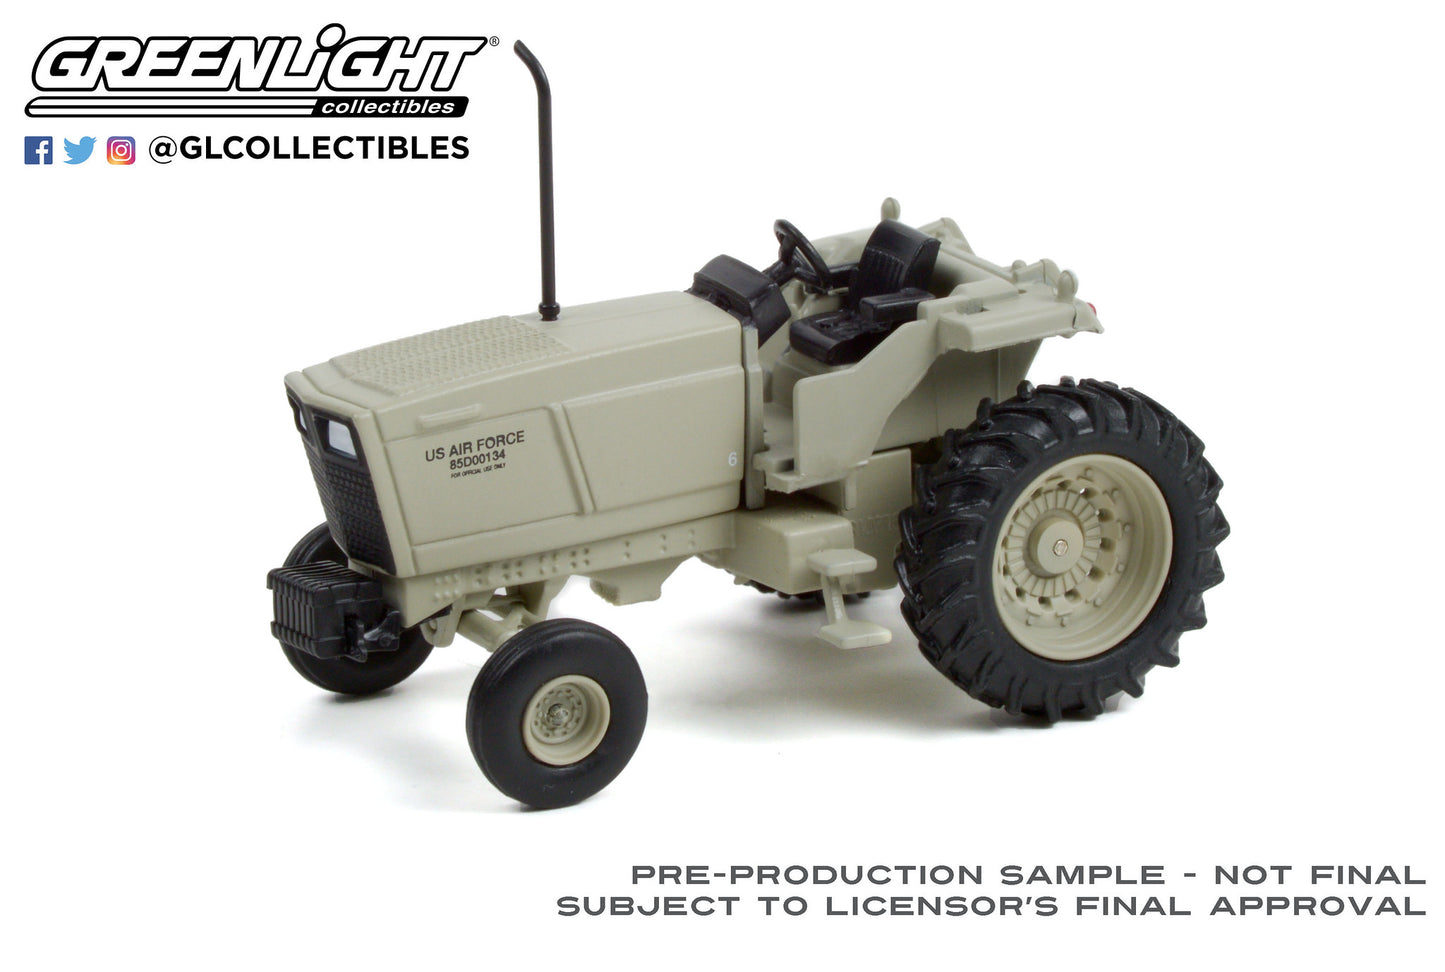 GreenLight 1:64 Down on the Farm Series 6 - 1983 Tractor - U.S. Air Force 48060-D